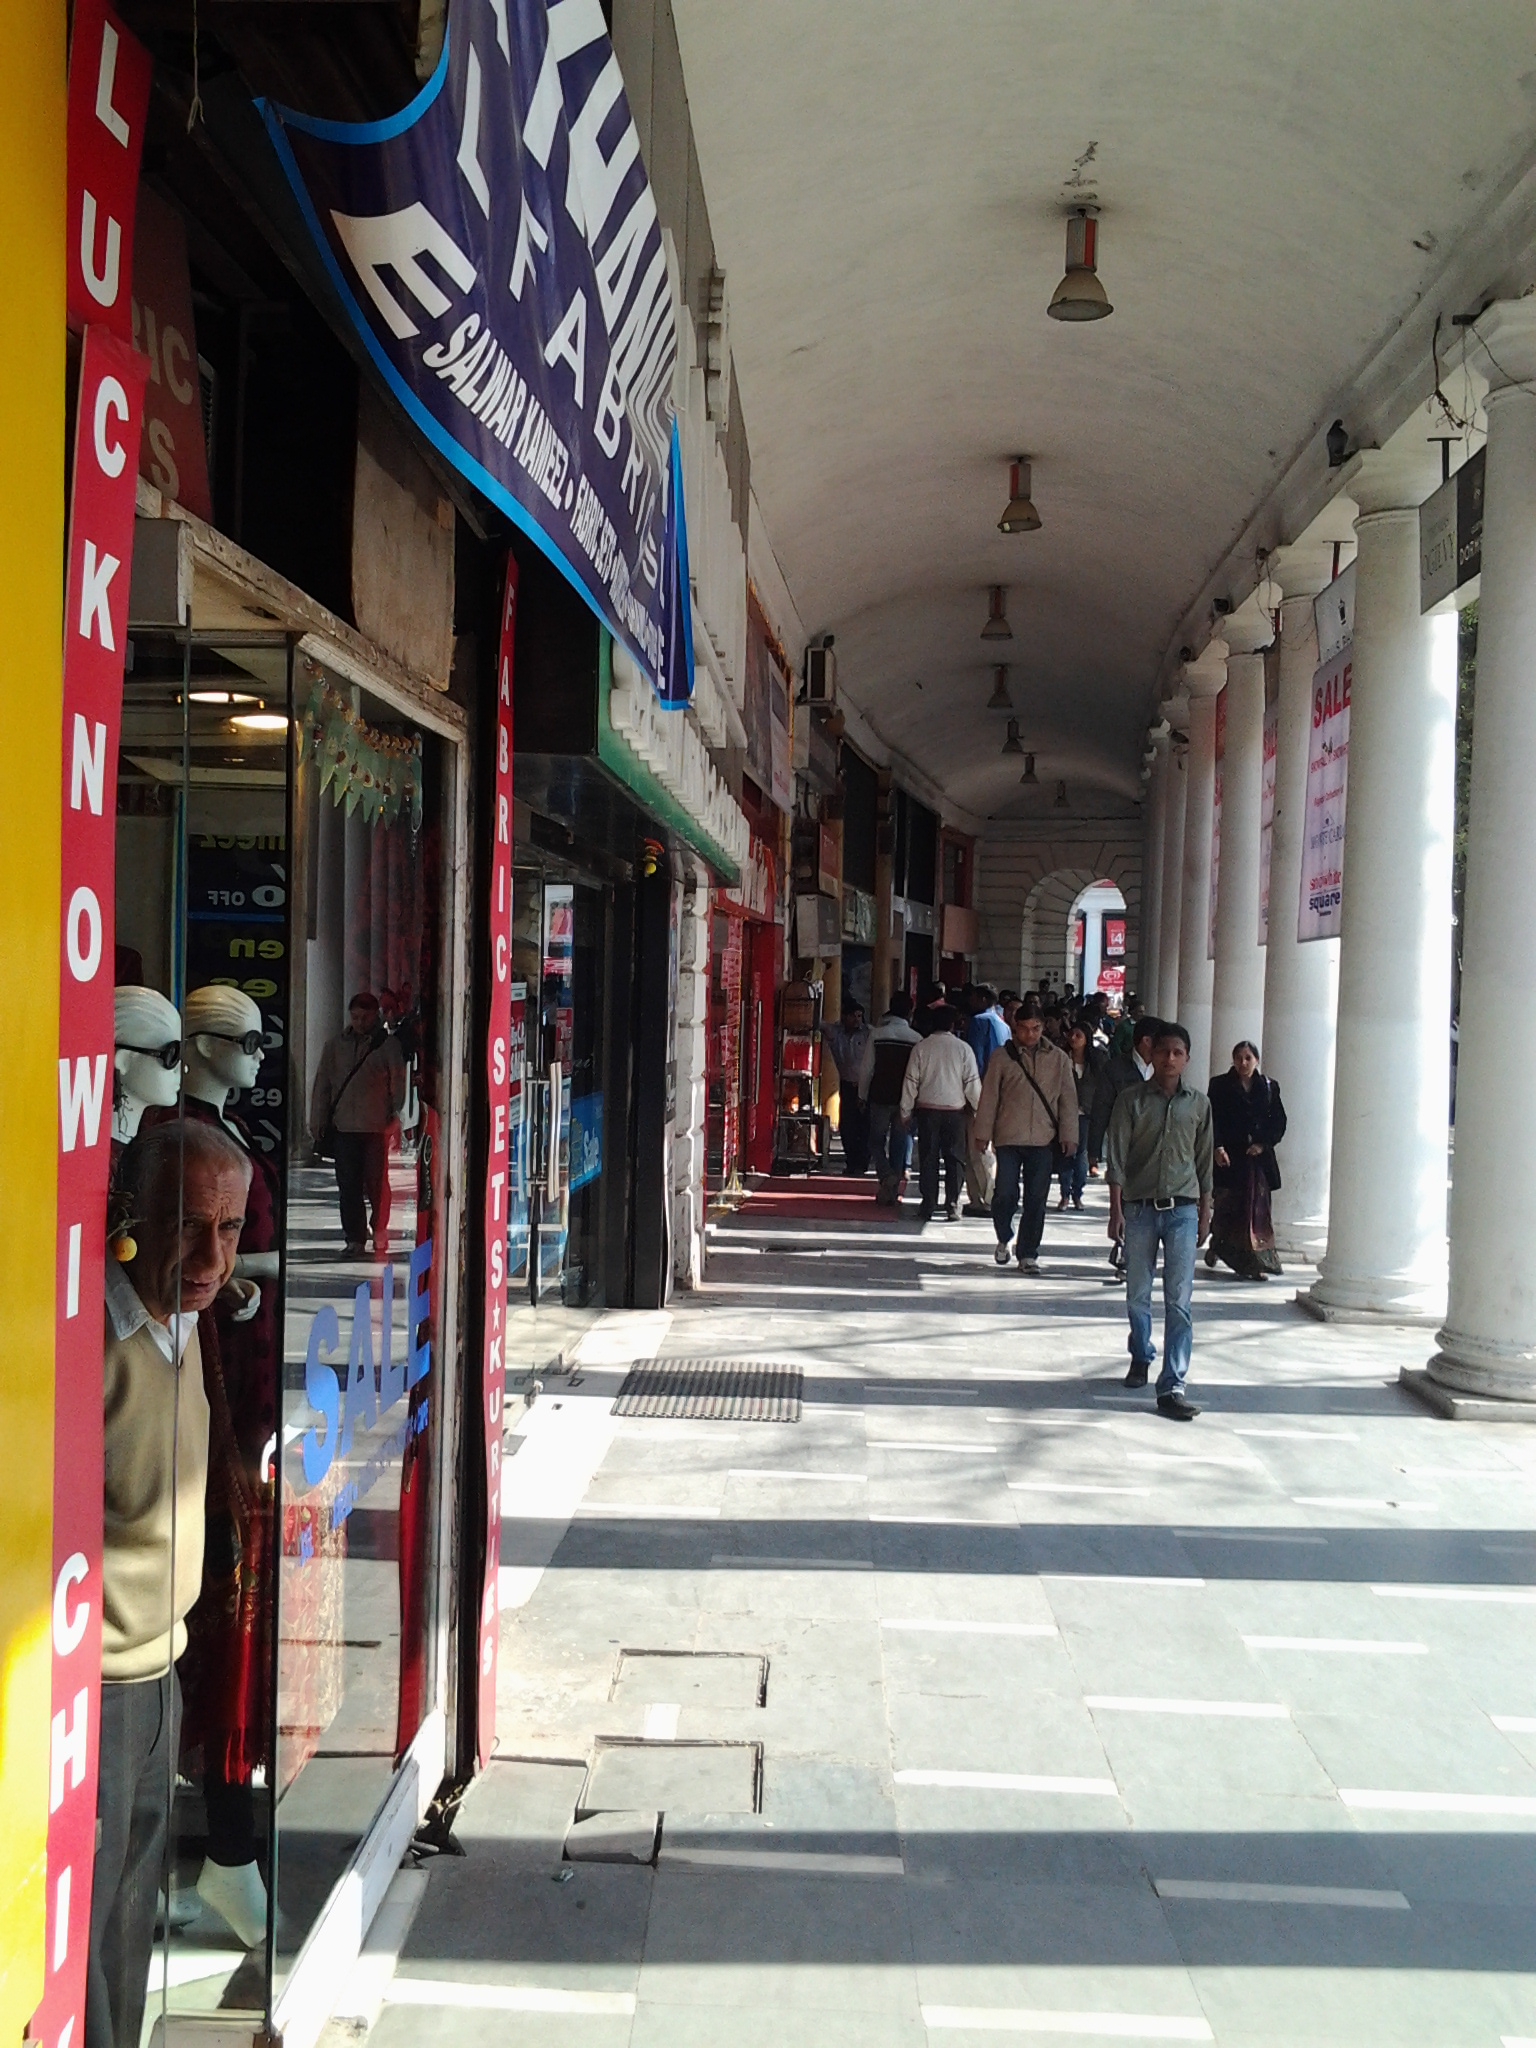 A view at Connaught Place (Rajiv Chowk)